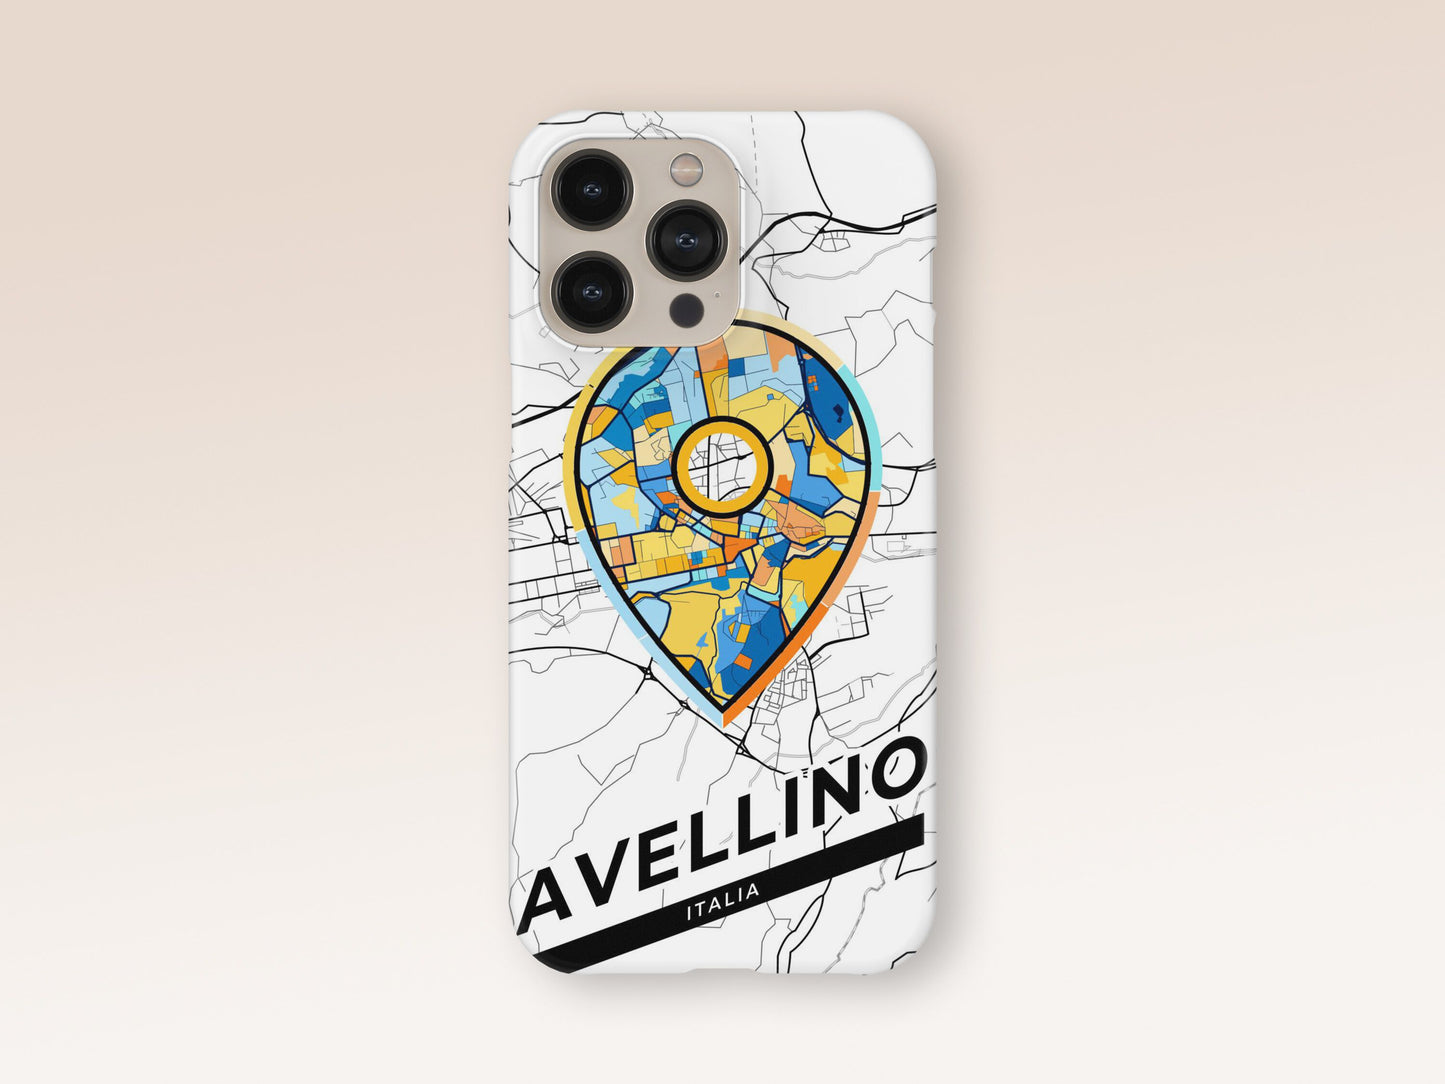 Avellino Italy slim phone case with colorful icon. Birthday, wedding or housewarming gift. Couple match cases. 1